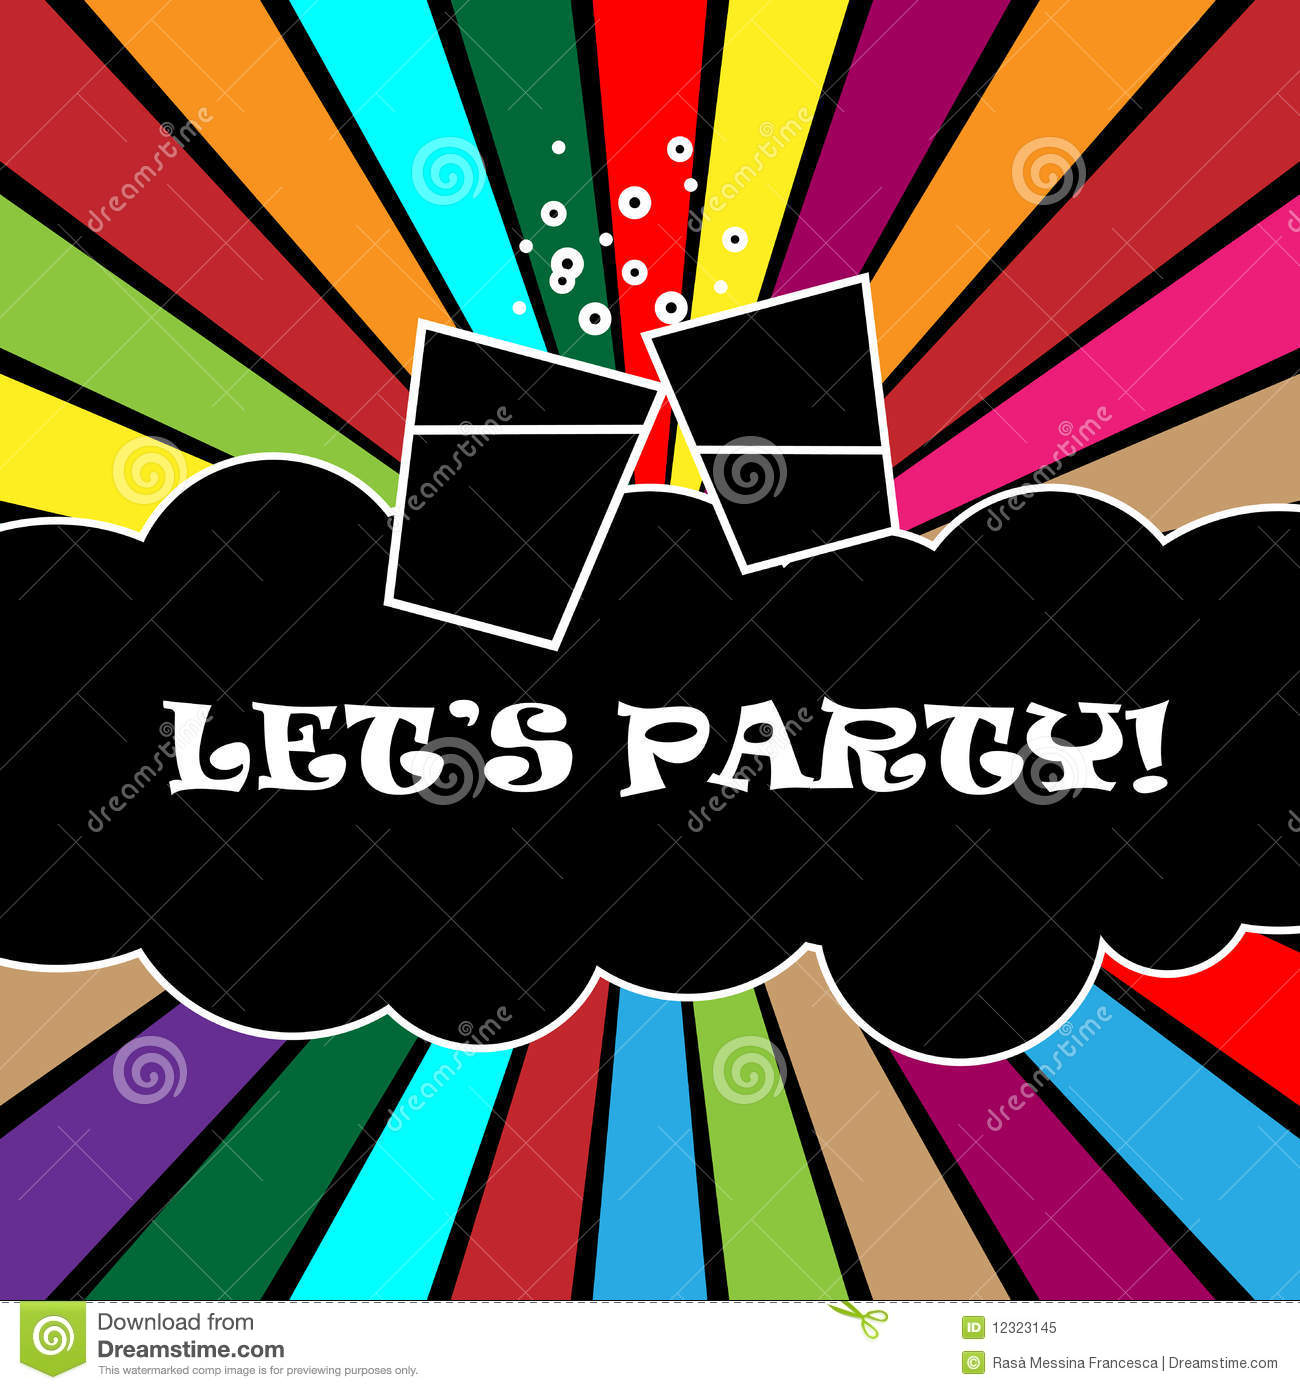 Let's Party Image